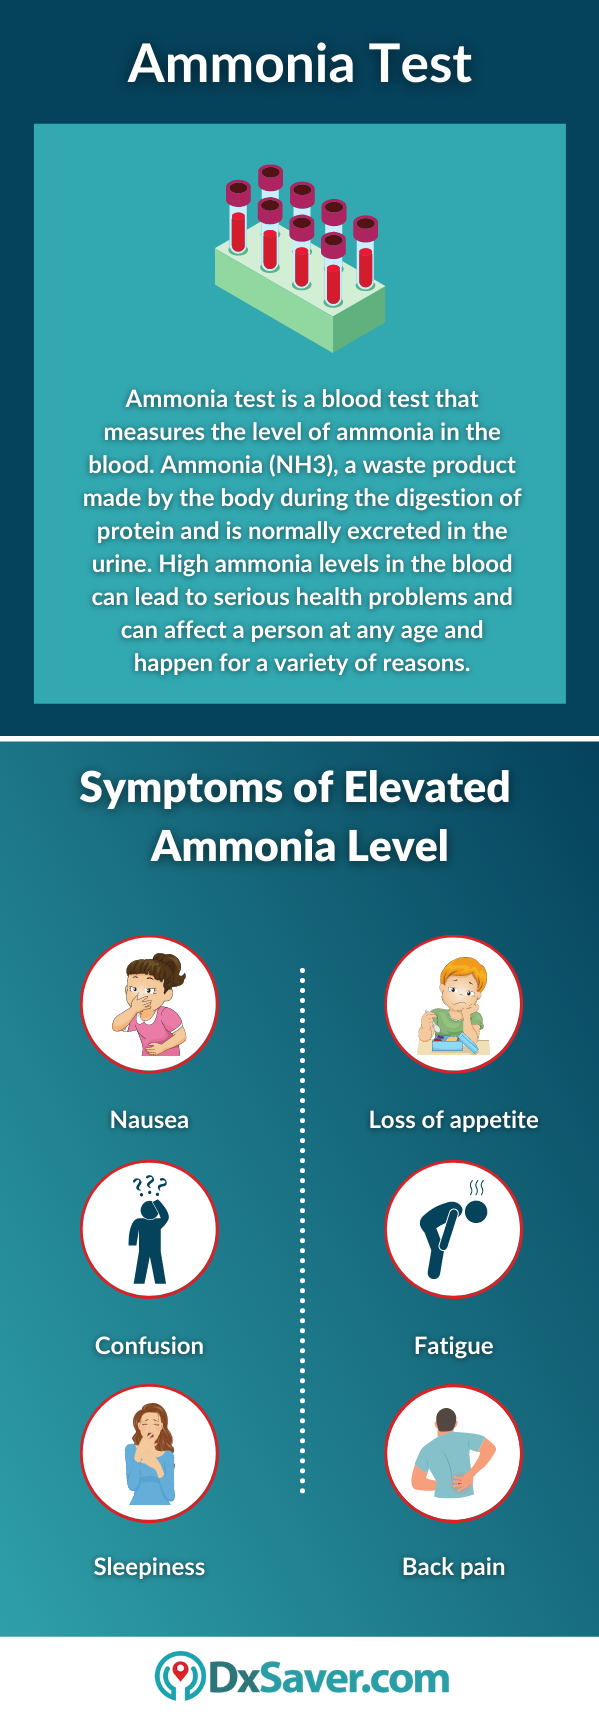 Ammonia Test and Symptoms of Excess Ammonia